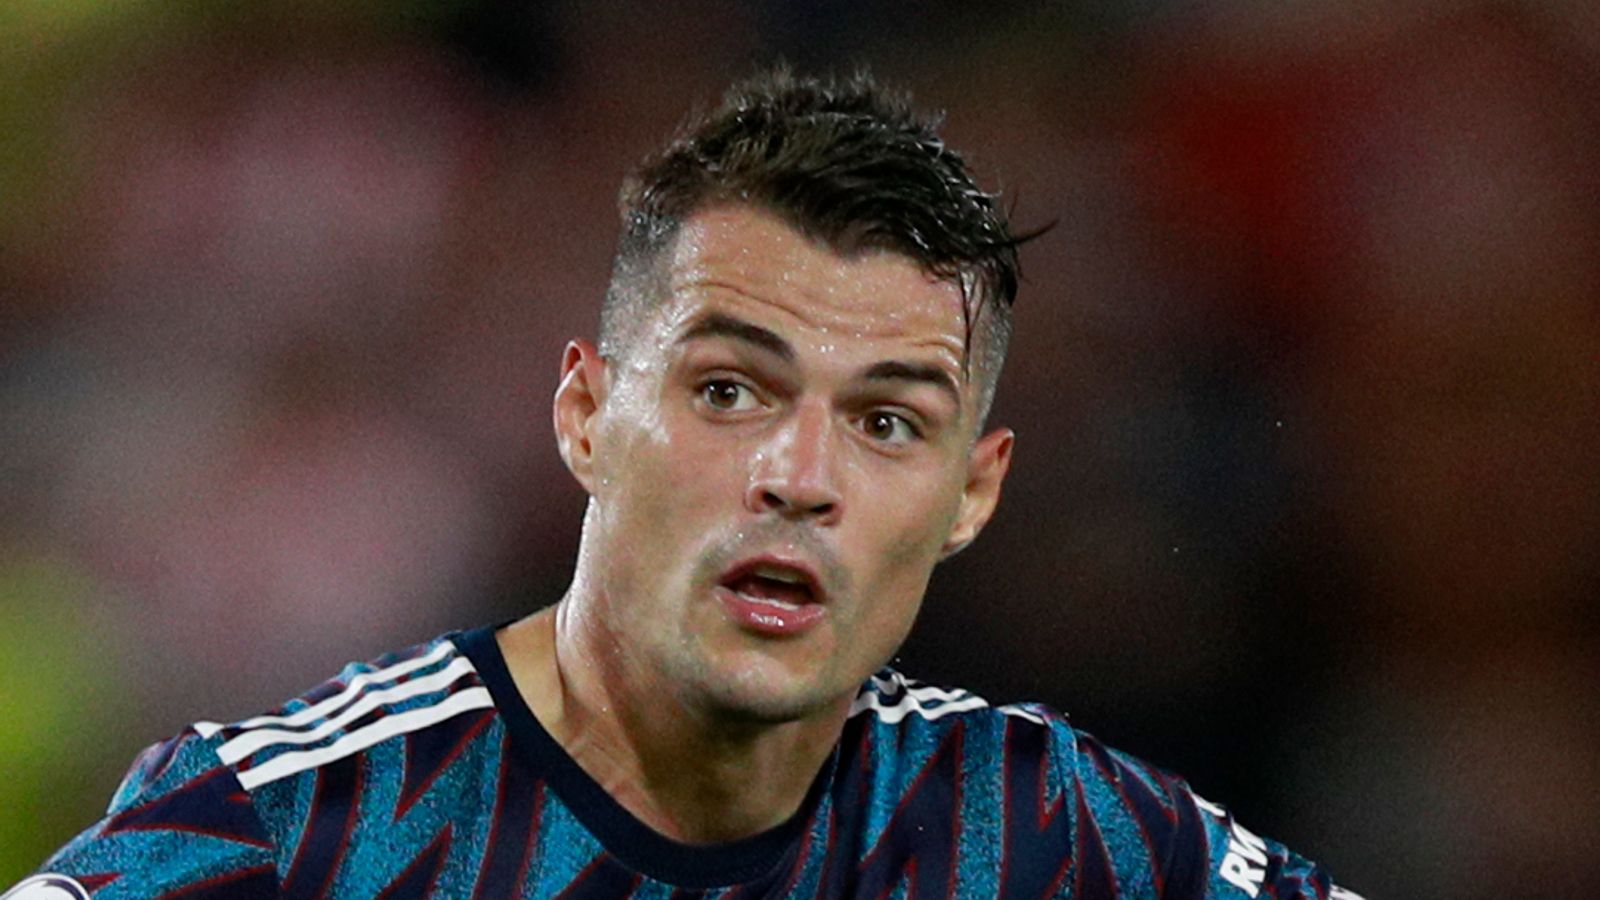 Arsenal: Xhaka 'feels the love much more than before' - BBC Sport